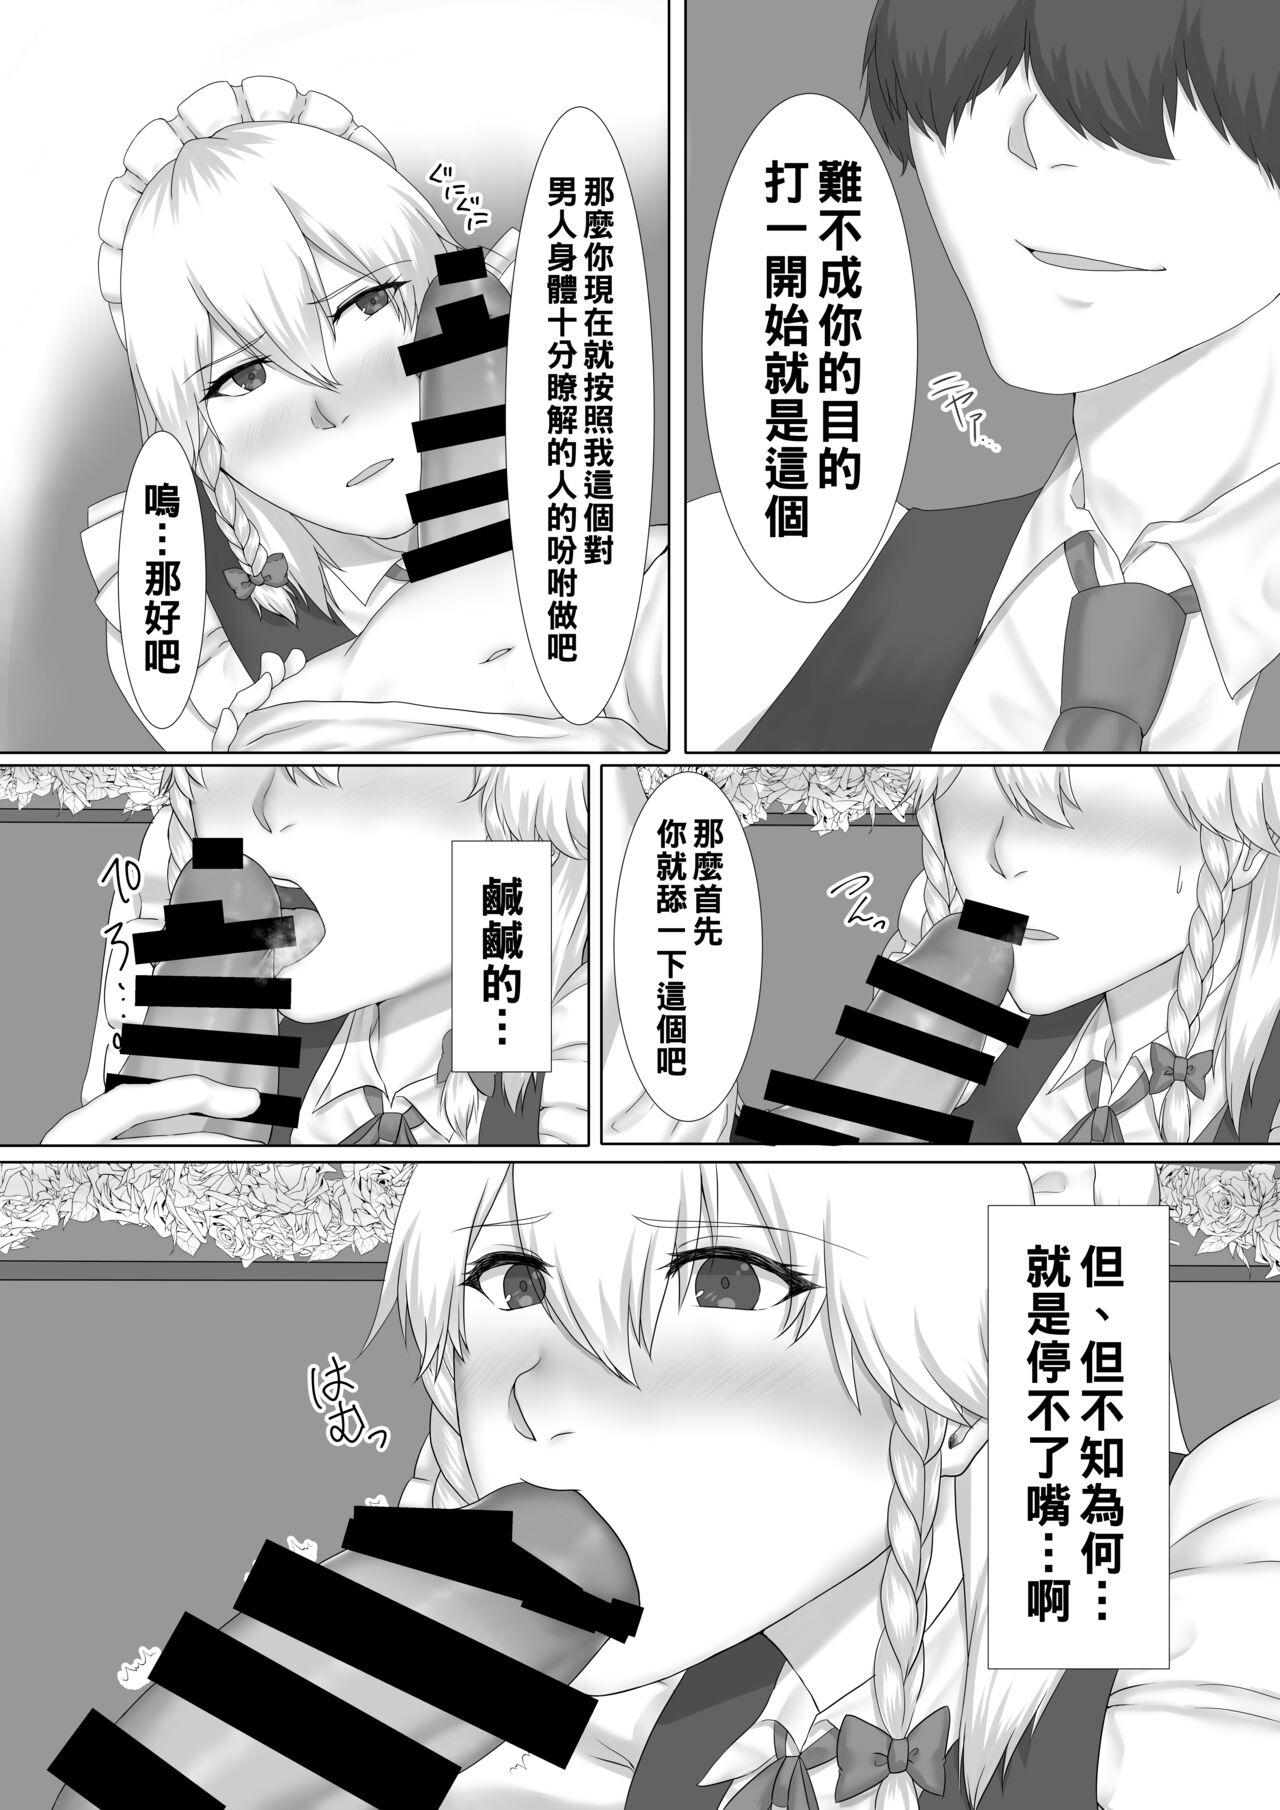 Spycam [糖質過多ぱると (只野めざし)] 咲夜さんとセフレになる本 (東方Project)（Chinese） - Touhou project Gay 3some - Page 5